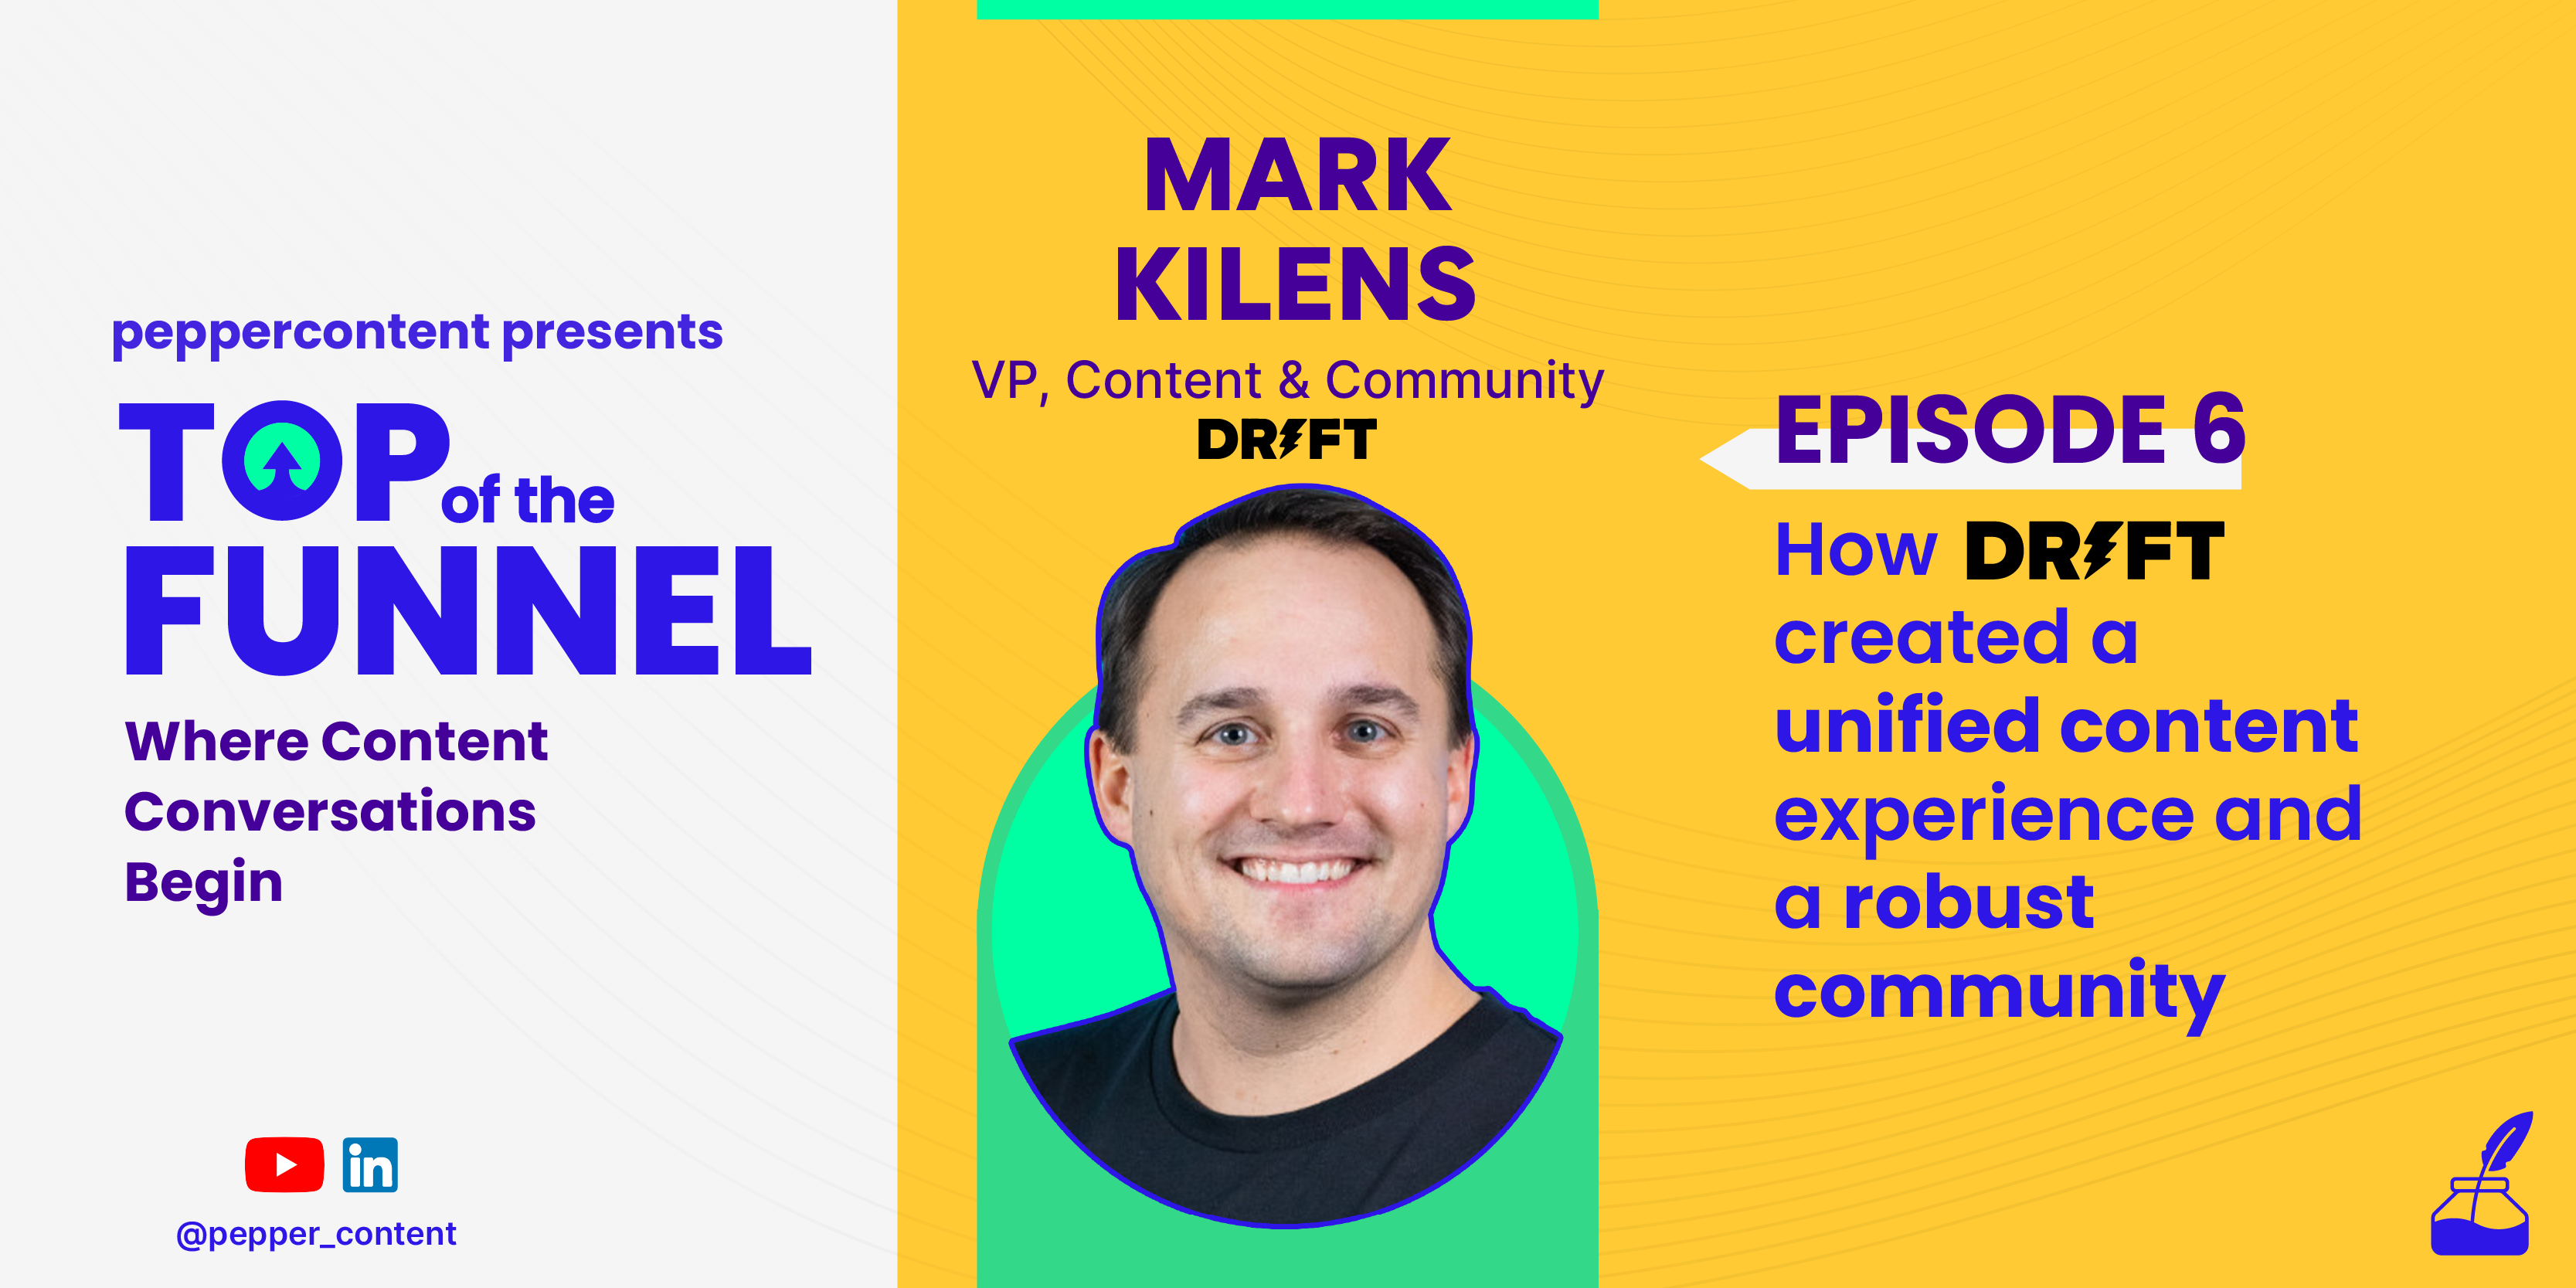 Mark Kilens of Drift on creating a unified content experience and a robust community 